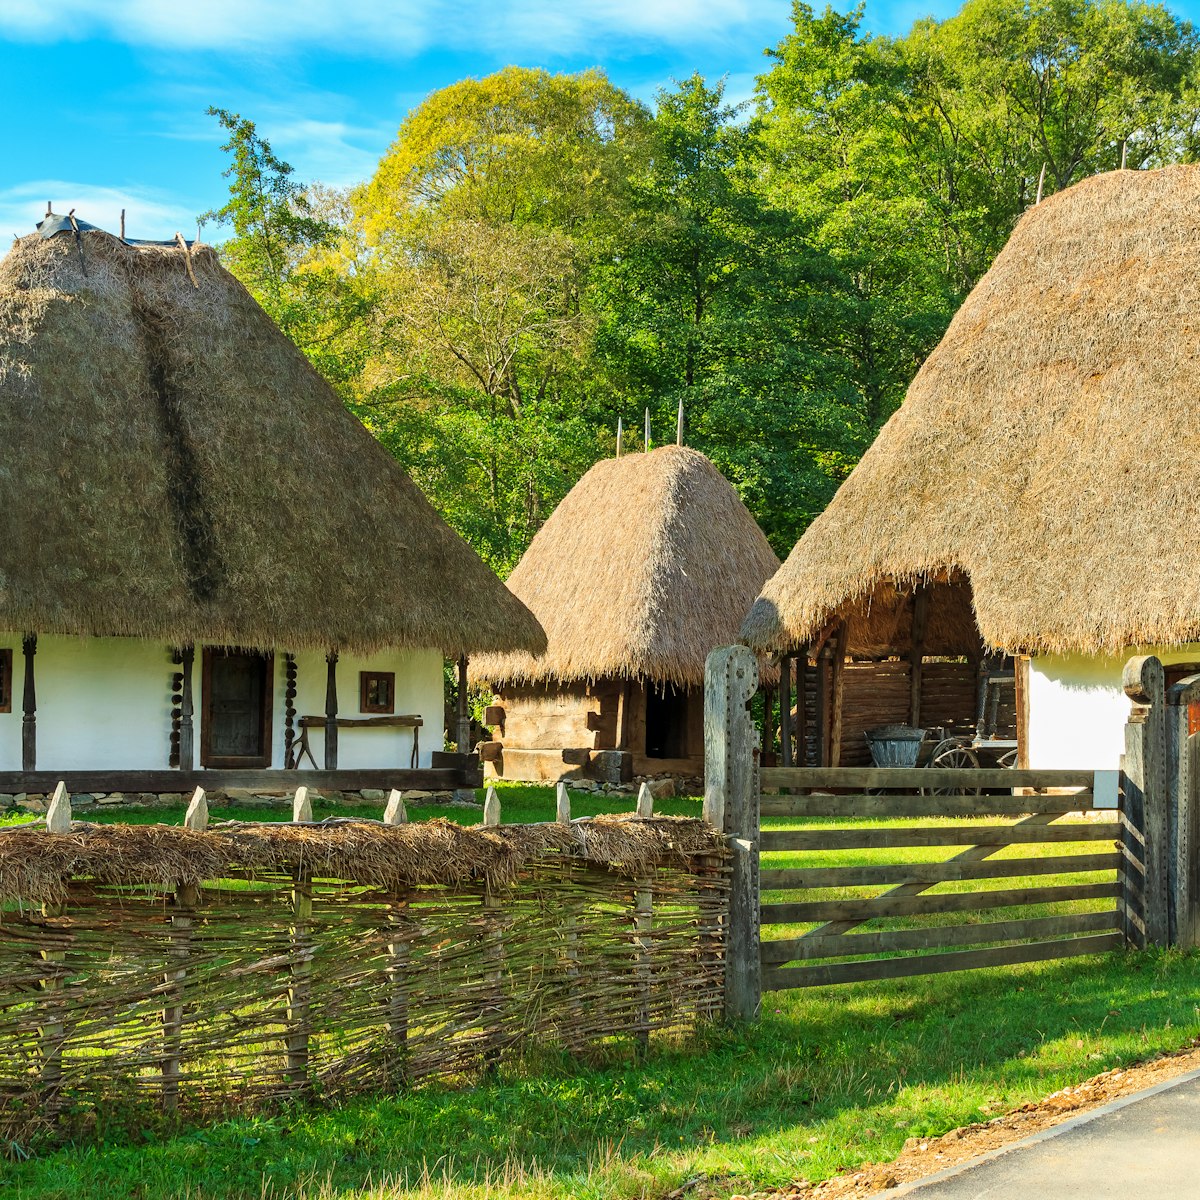 The old peasant houses,Astra village museum,Sibiu,Transylvania,Romania,Europe; Shutterstock ID 224656321; Your name (First / Last): Josh Vogel; Project no. or GL code: 56530; Network activity no. or Cost Centre: Online-Design; Product or Project: 65050/7529/Josh Vogel/LP.com Destination Galleries